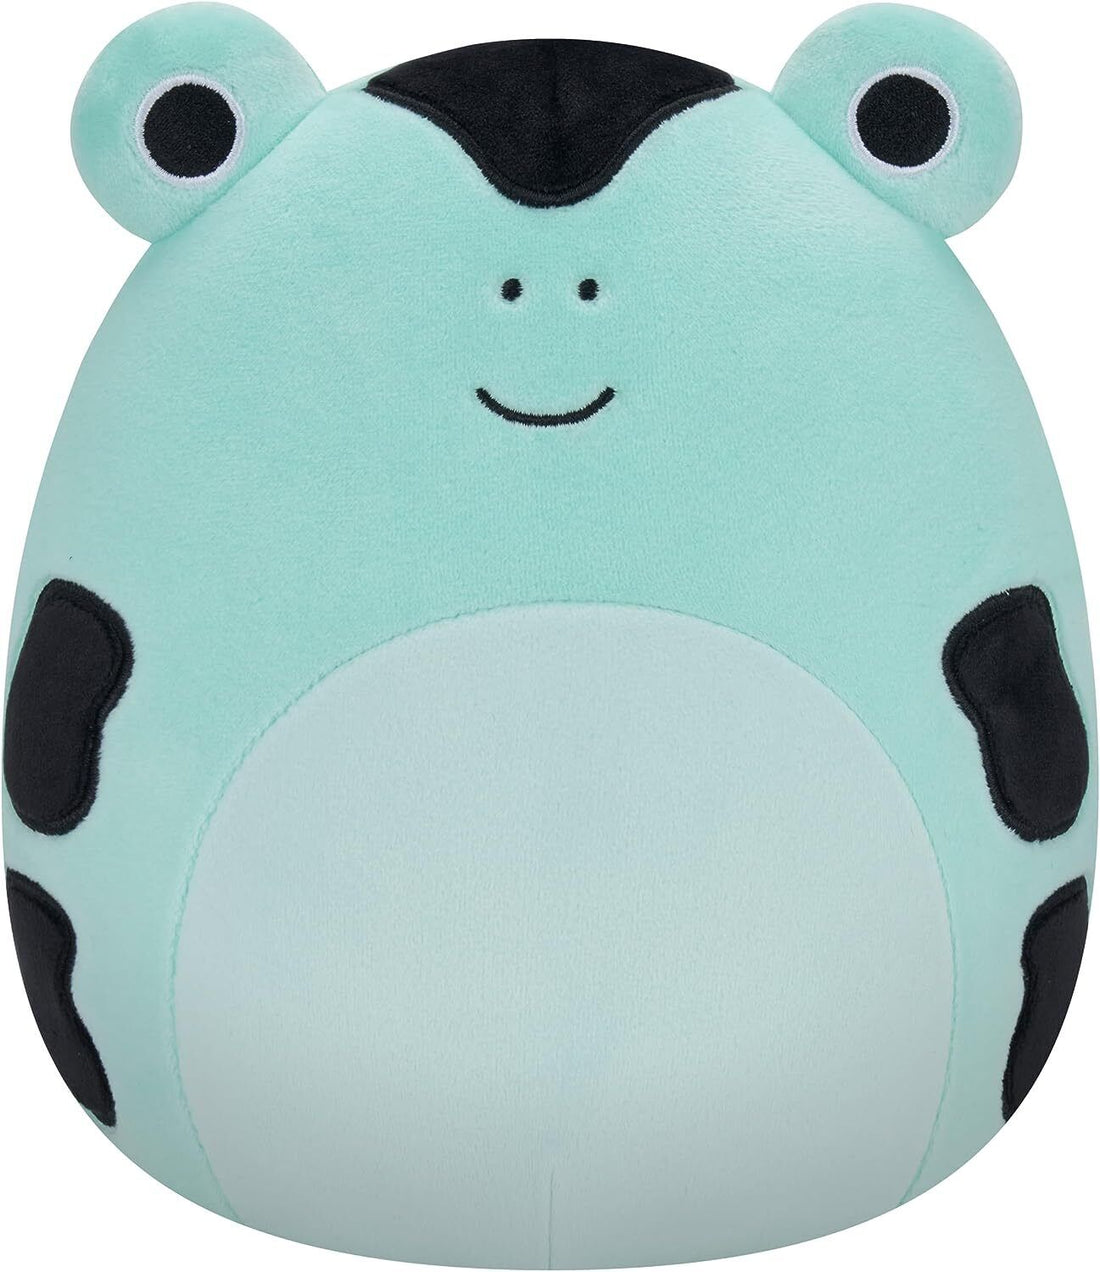 Squishmallows Squishmallow 7.5-Inch SOFT CUDDLE Toy Cute Animal Pillow Kid GIFT - DEAR